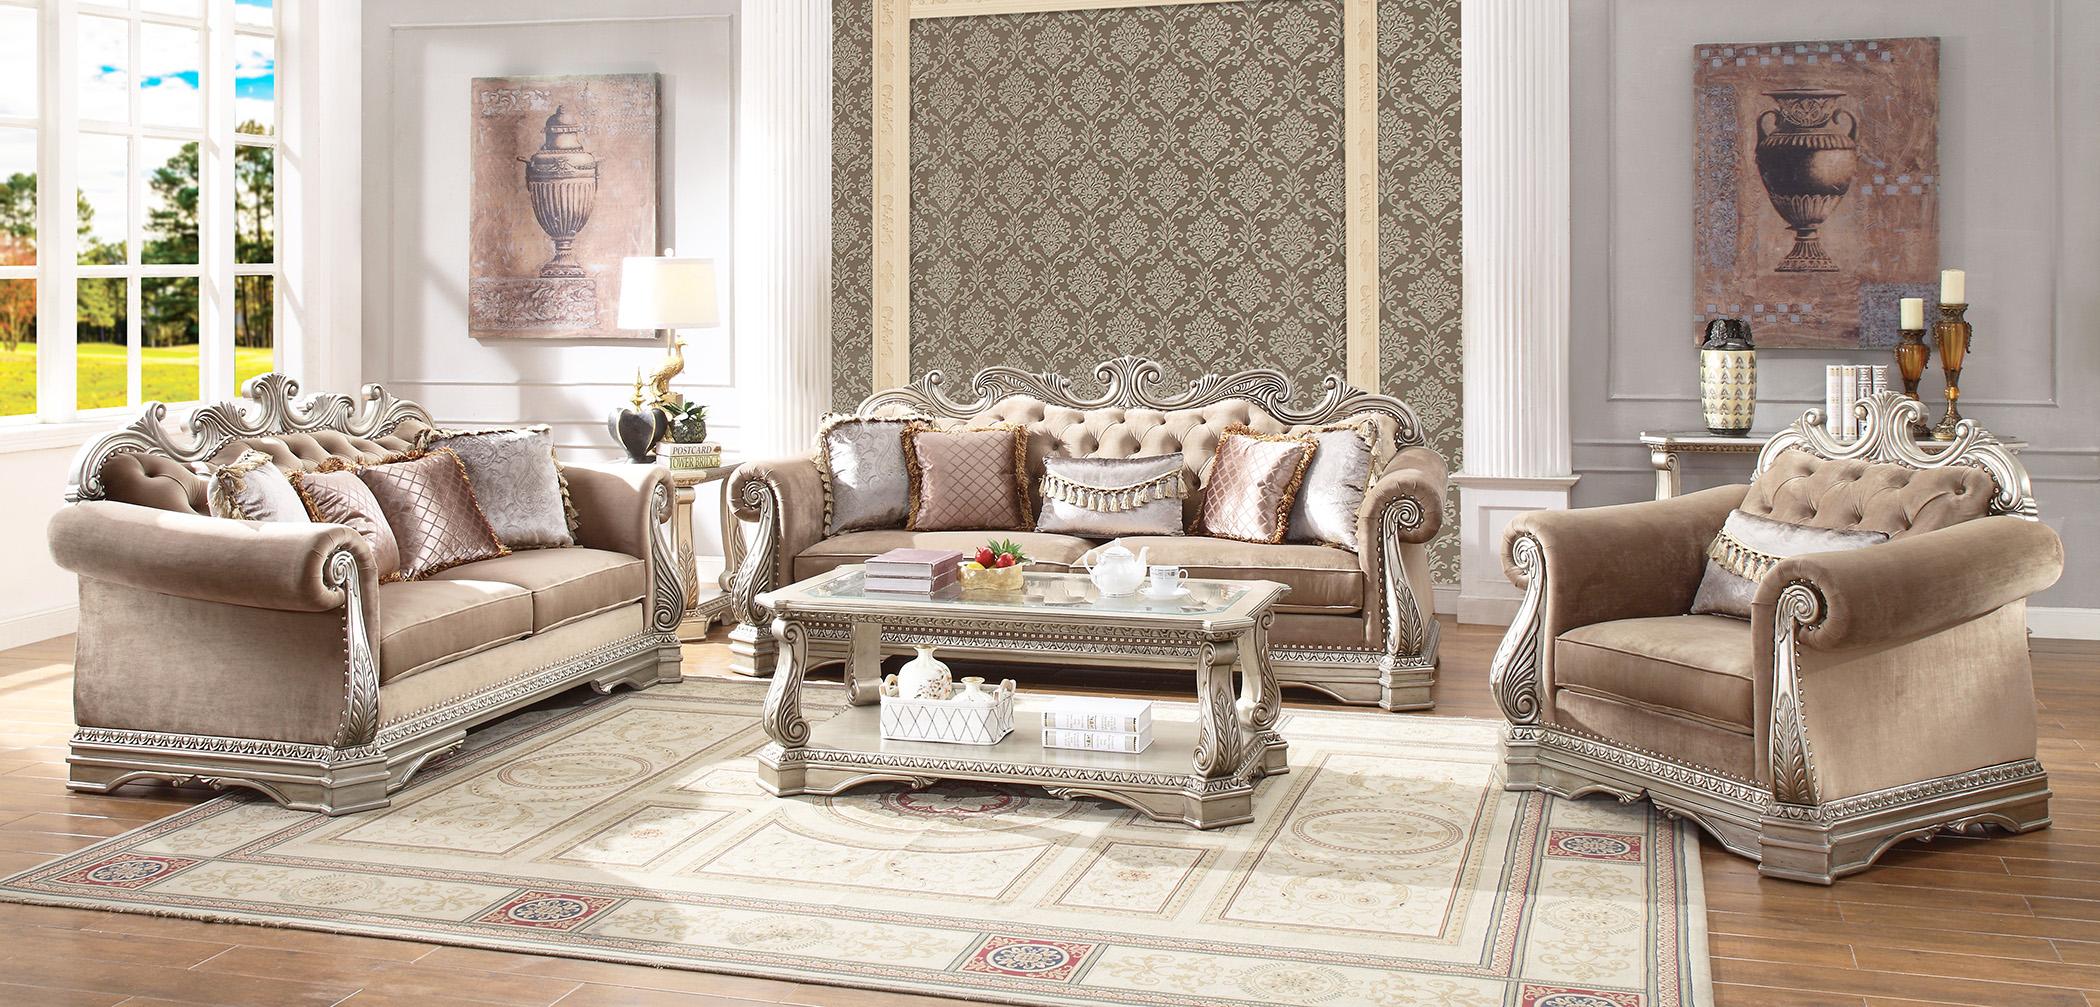 Classic, Traditional Sofa Loveseat and Chair Set Northville-56930 Northville-56930-Set-3 in Antique, Champagne Velvet